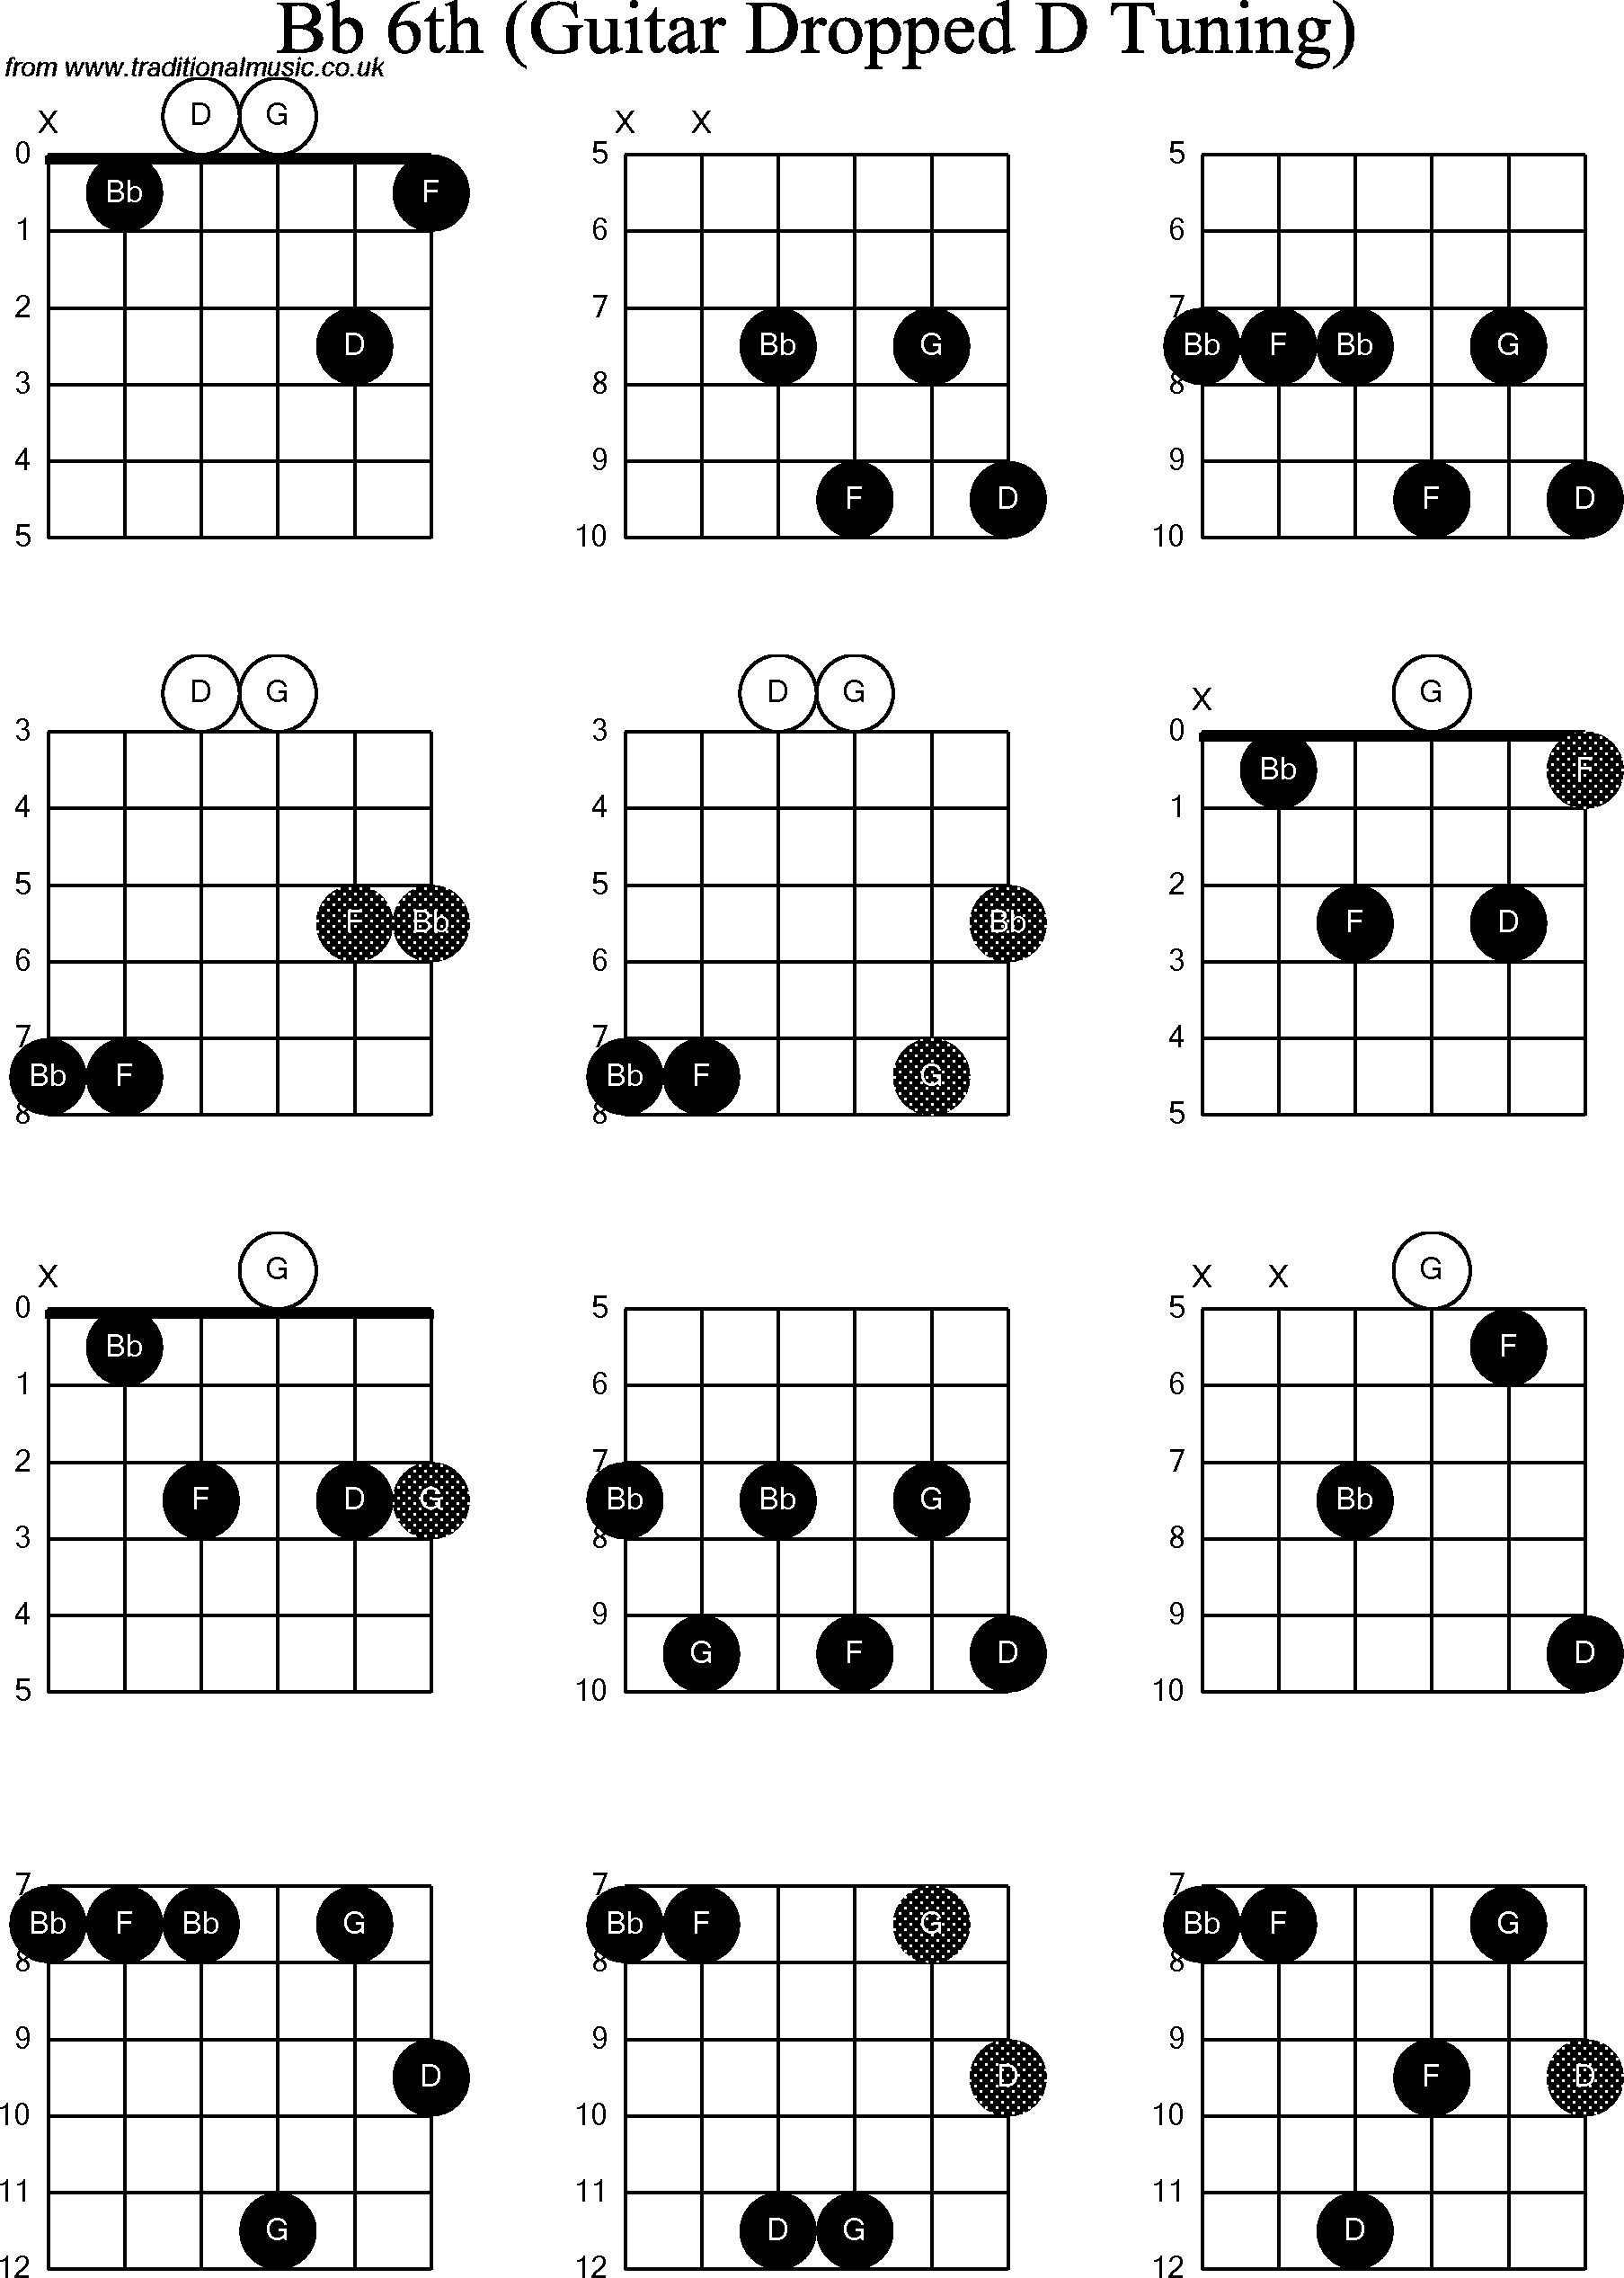 Chord diagrams for dropped D Guitar(DADGBE), Bb6th